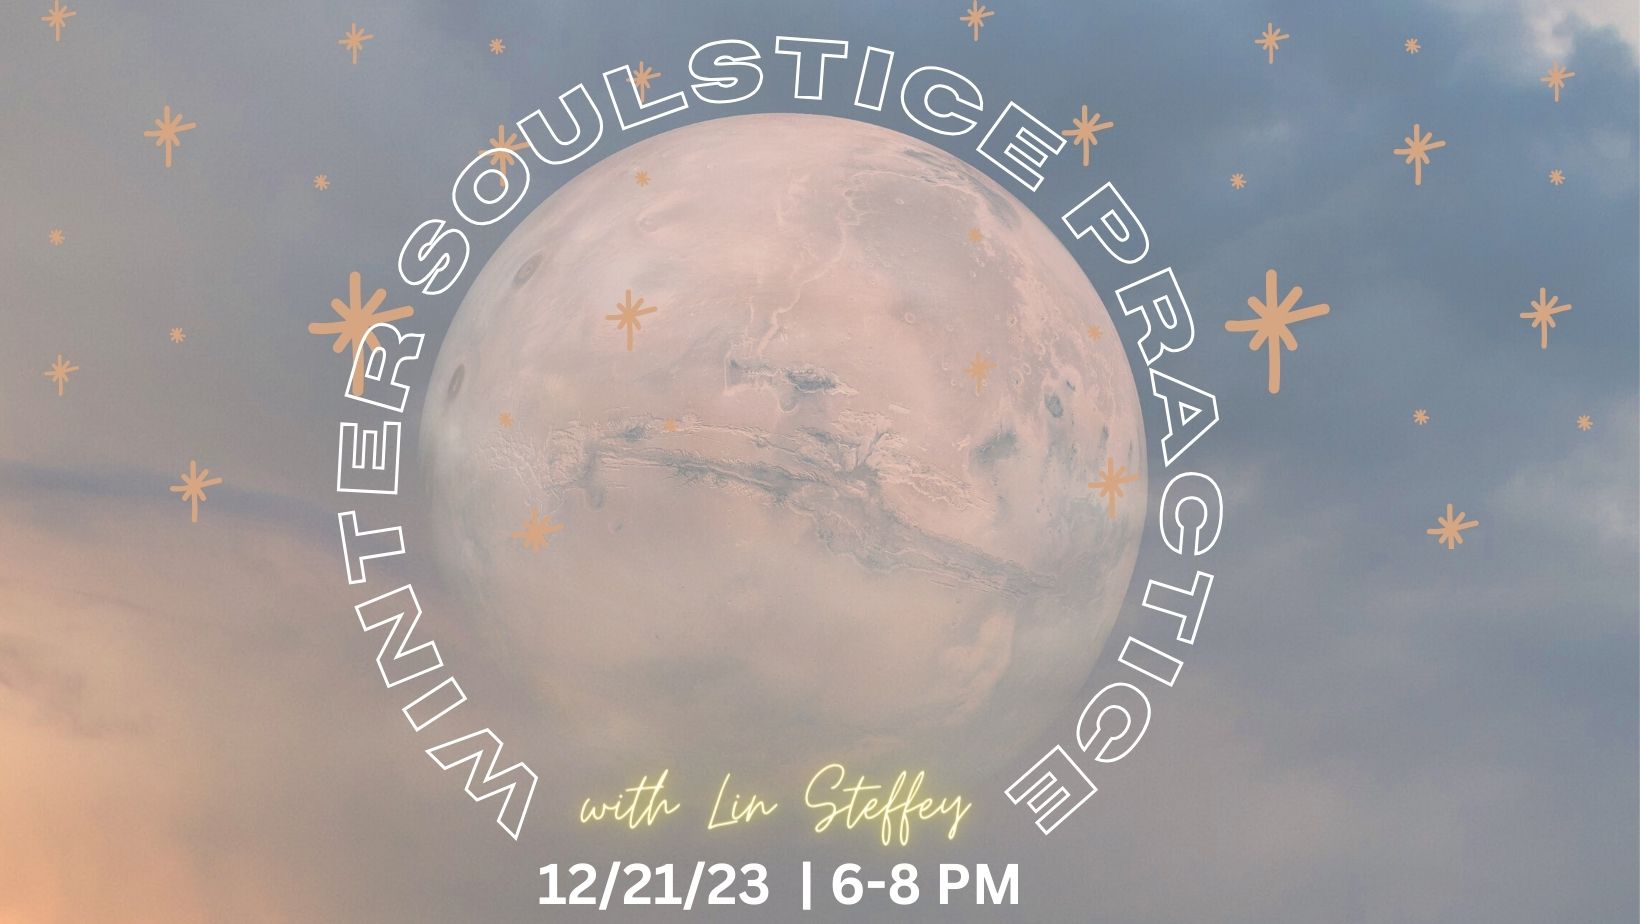 banner image for winter soulstice event. A full moon with a dusky sky behind it and surrounded by graphic stars